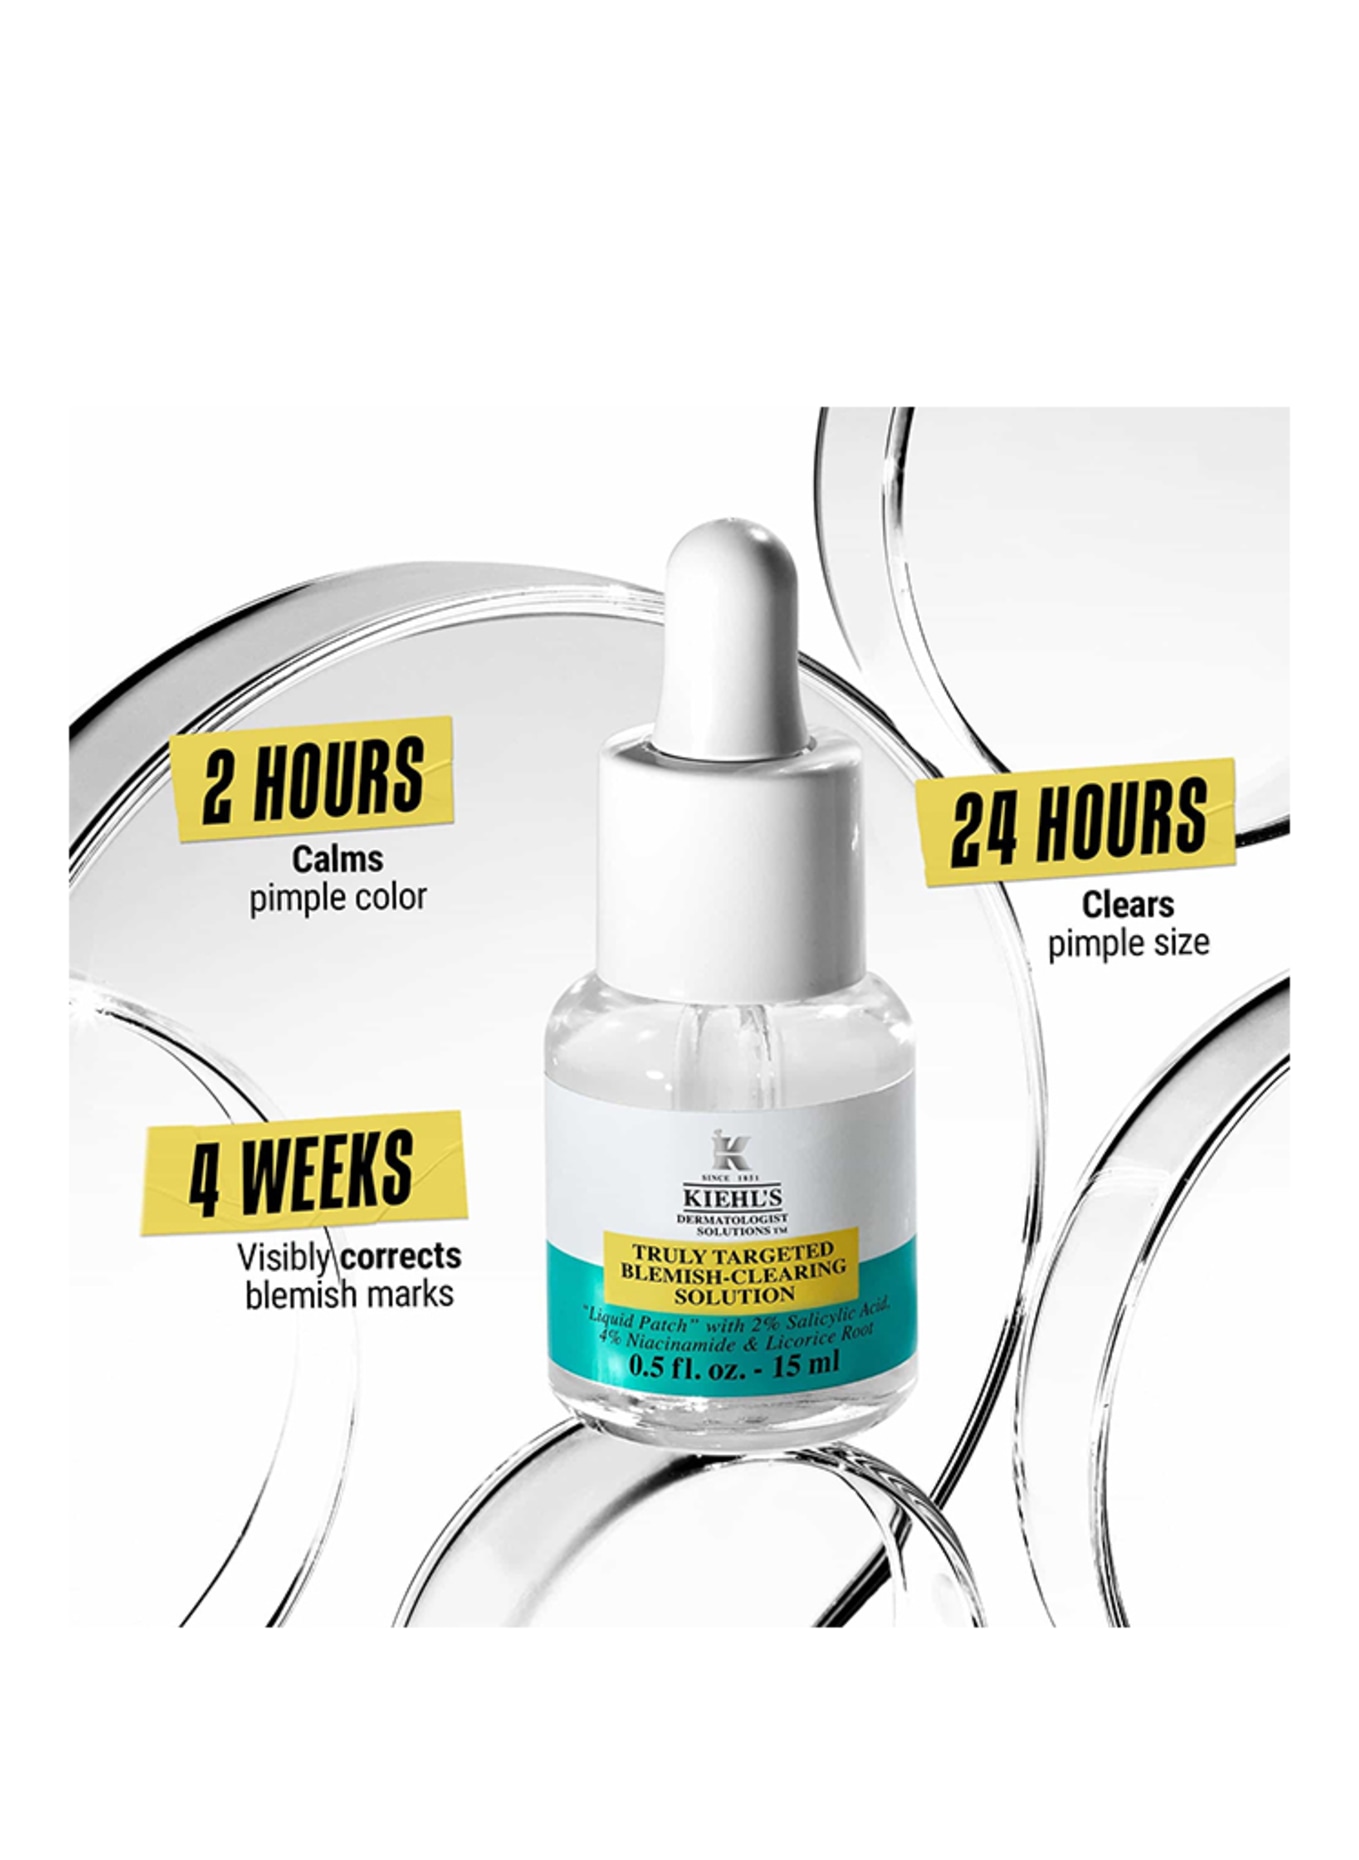 Kiehl's TRULY TARGETED BLEMISH CLEARING SOLUTION (Obrazek 5)